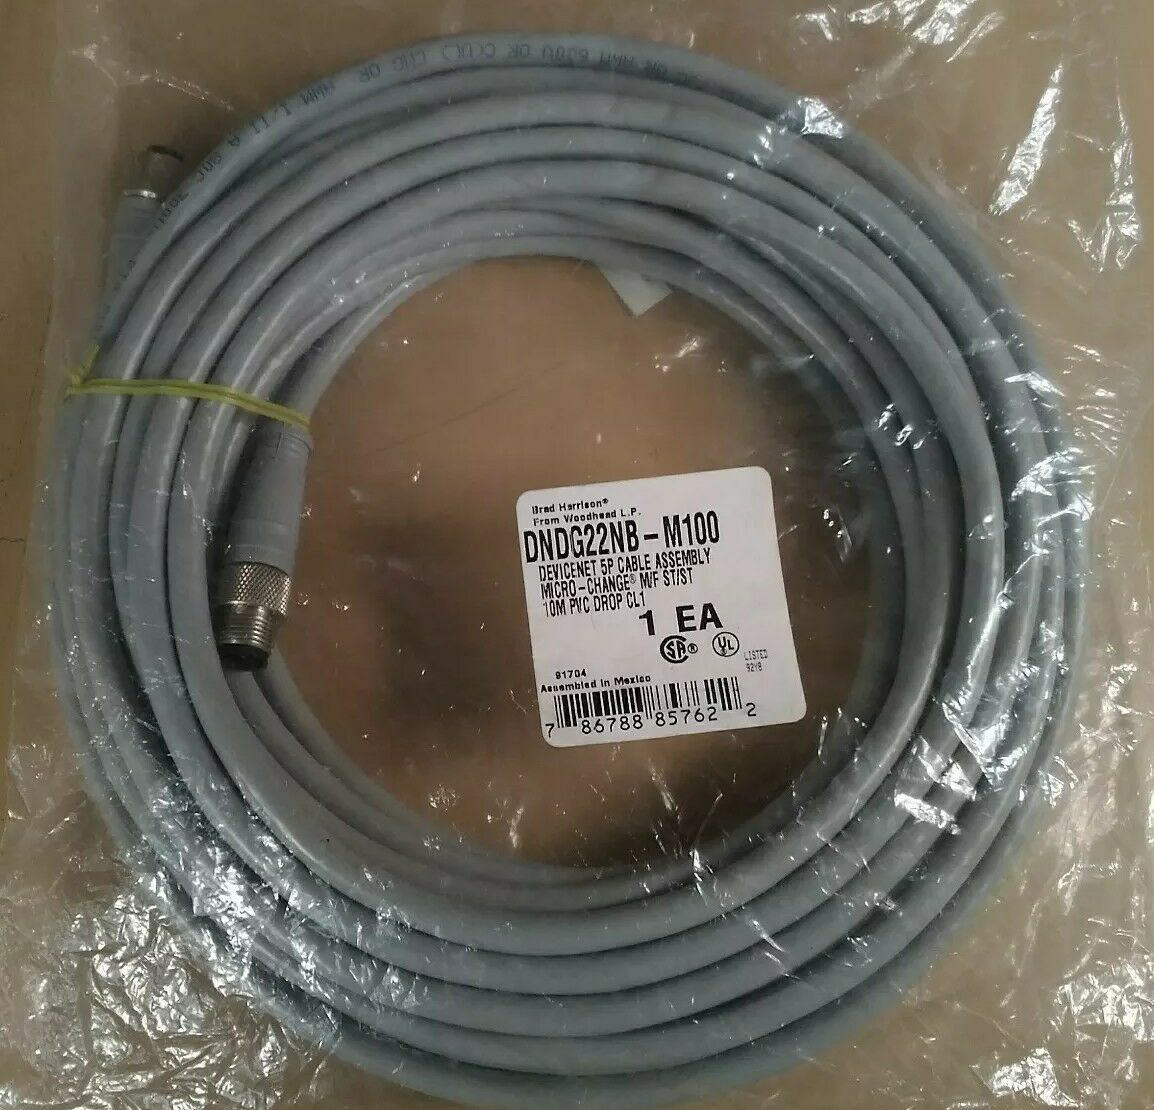 WOODHEAD CONNECTIVITY/ BRAD HARRISON DNDG22NB-M100 CABLE ASSEMBLY             5E